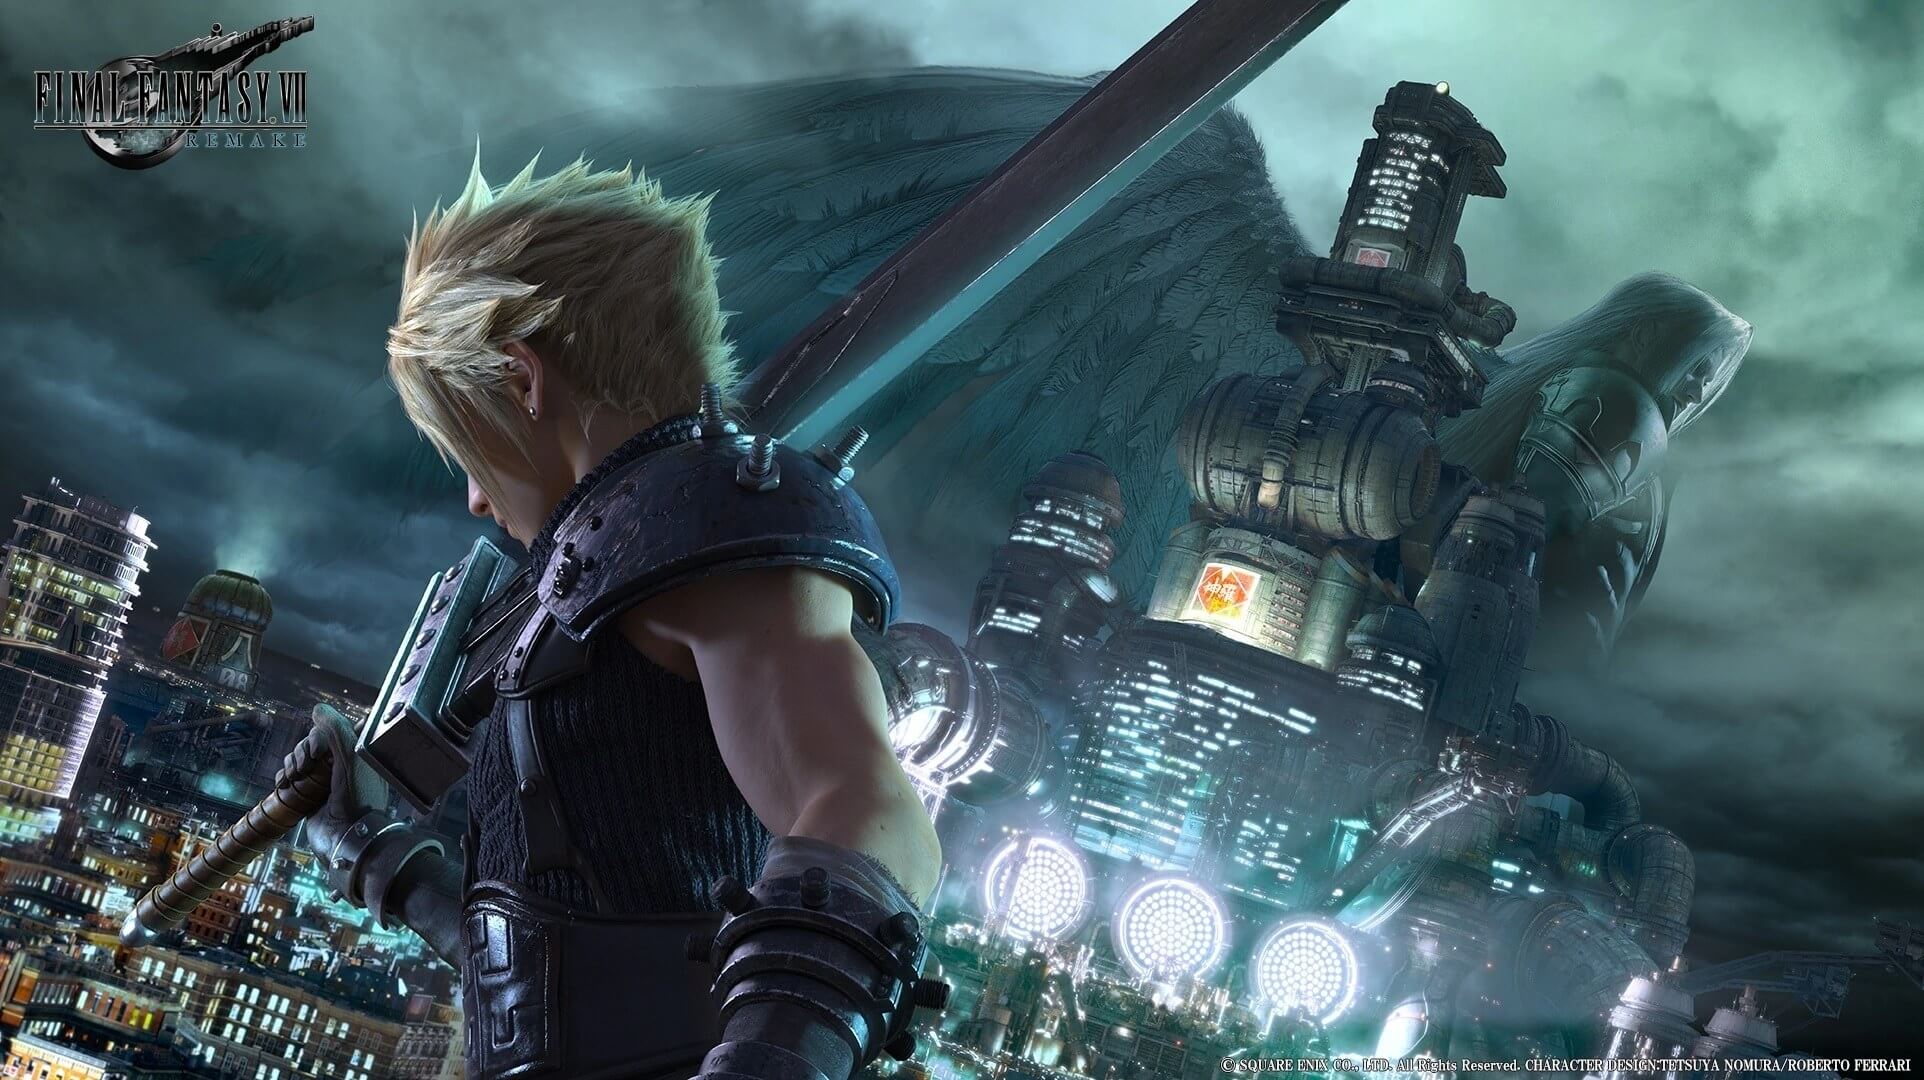 Final Fantasy VII Remake review roundup: Square Enix's reimagining of a classic manages to get it right